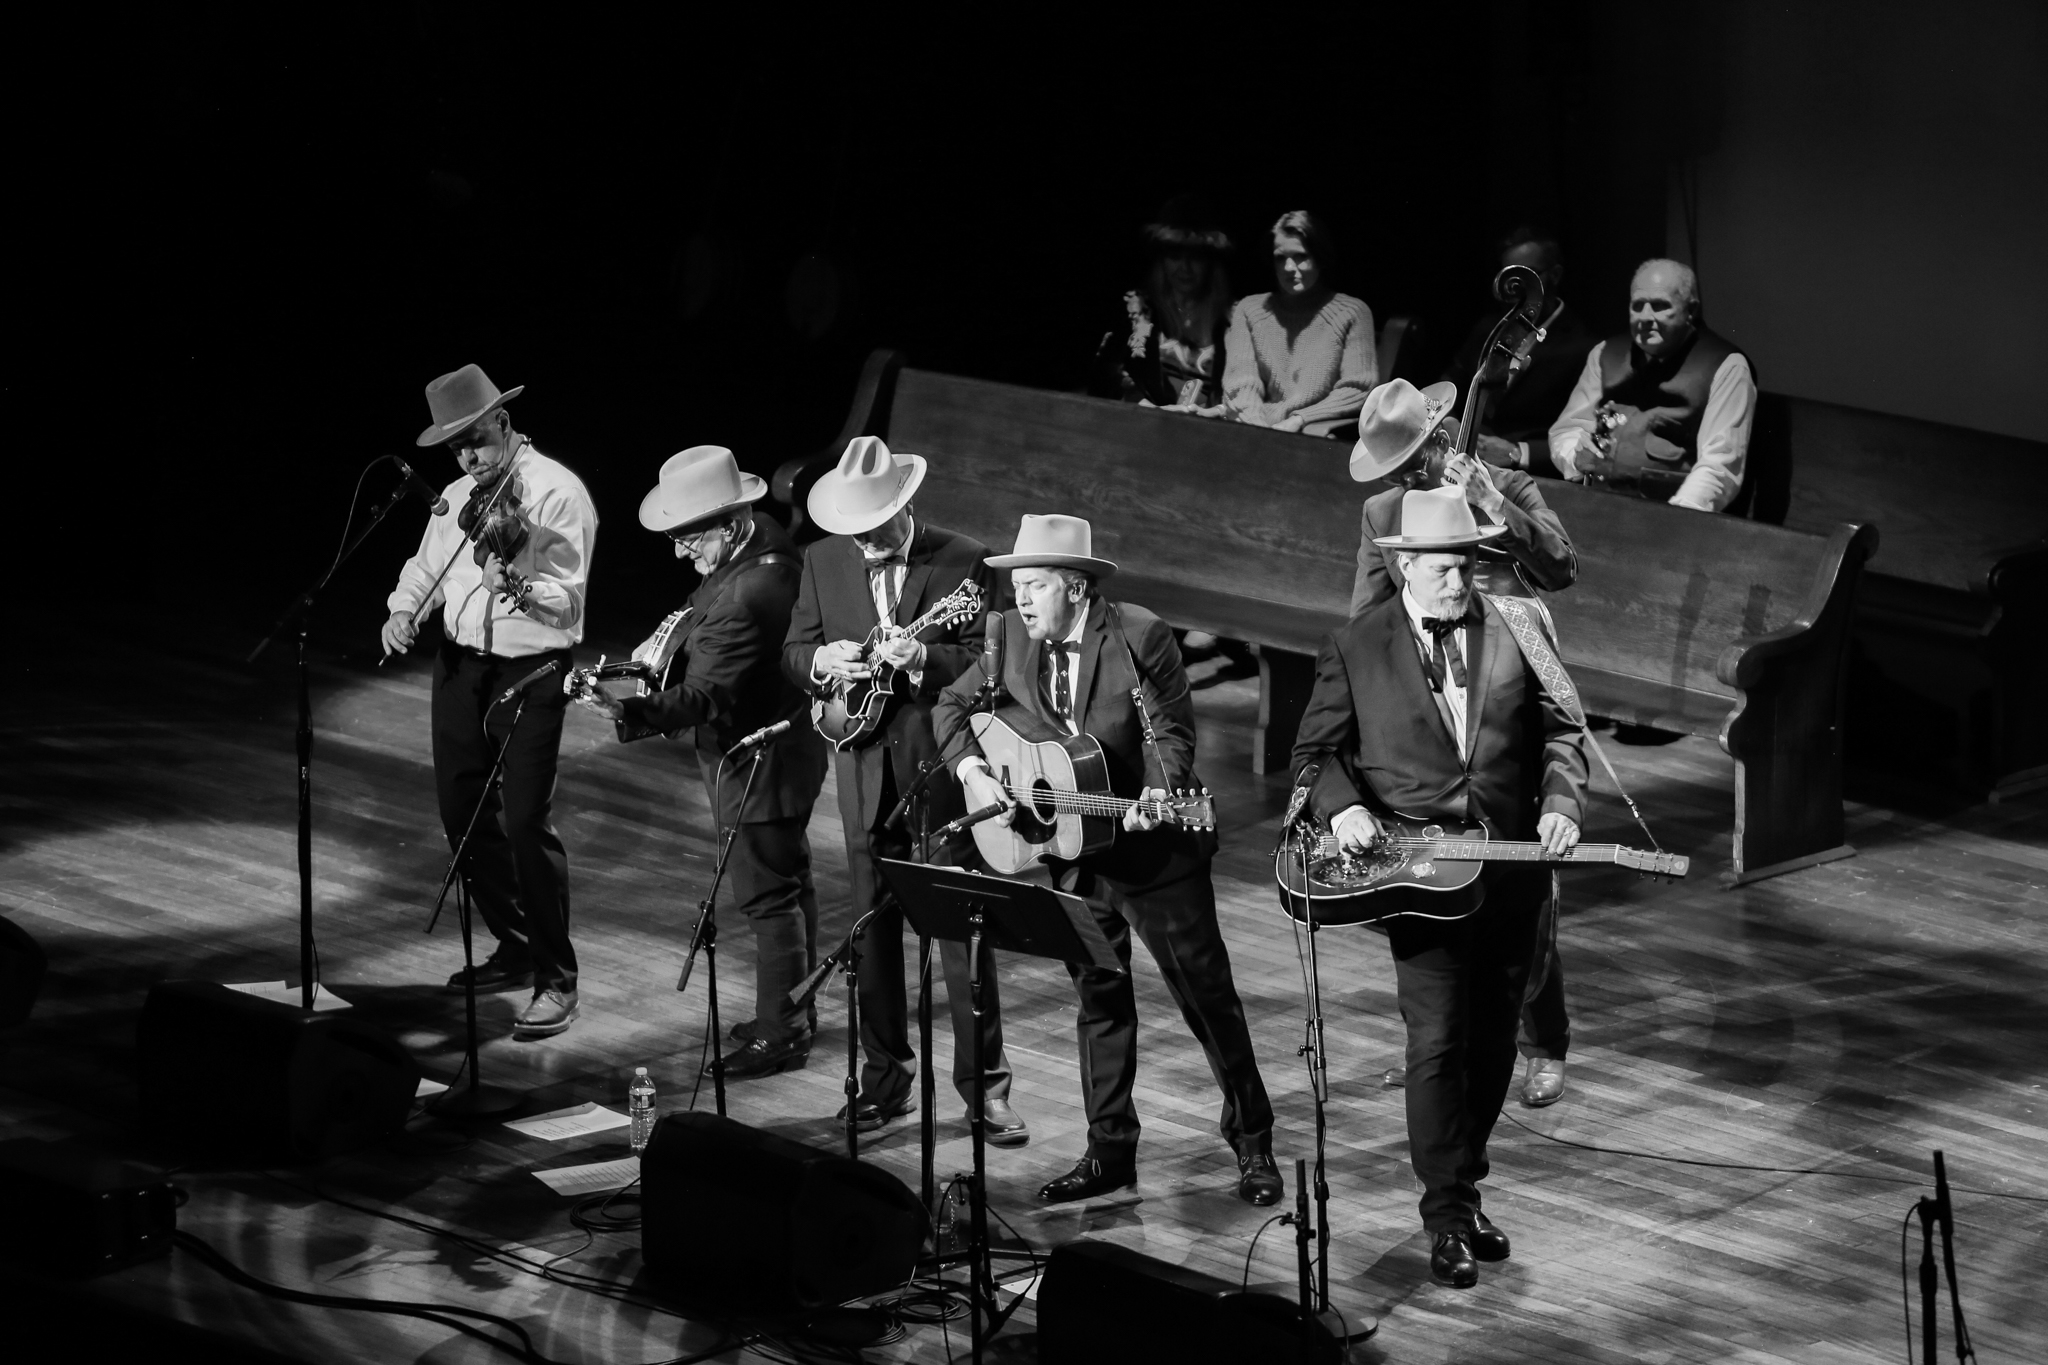 The Ryman Auditorium in Nashville is the birthplace of bluegrass music